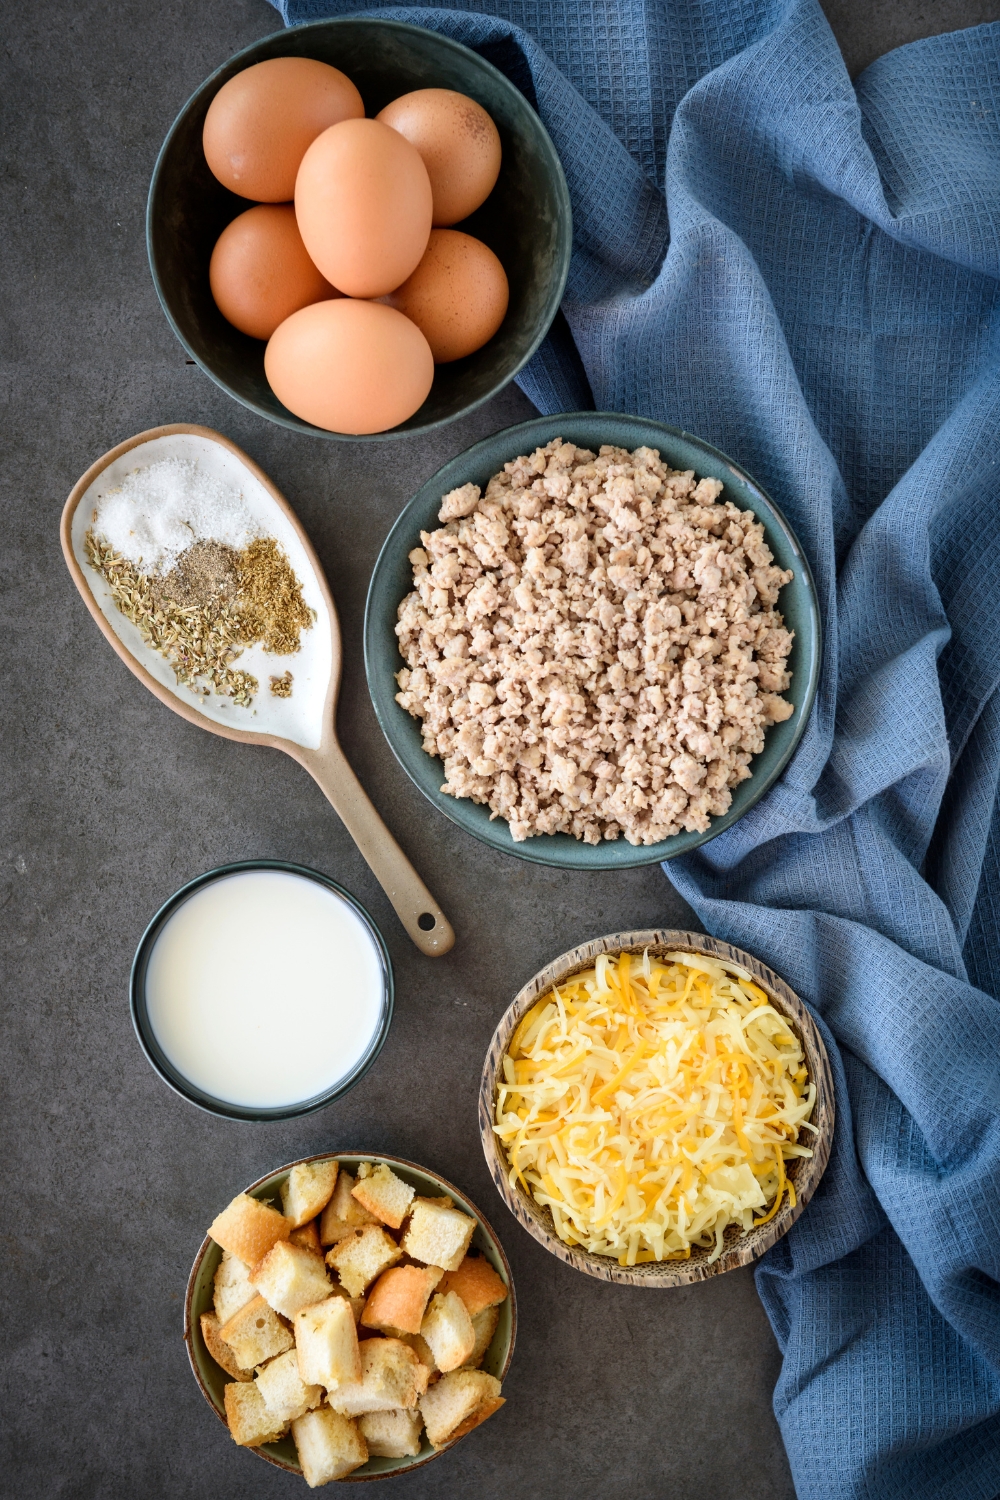 An assortment of ingredients including bowls of eggs, sausage crumbles, shredded cheese, milk, bread cubes, and seasonings.